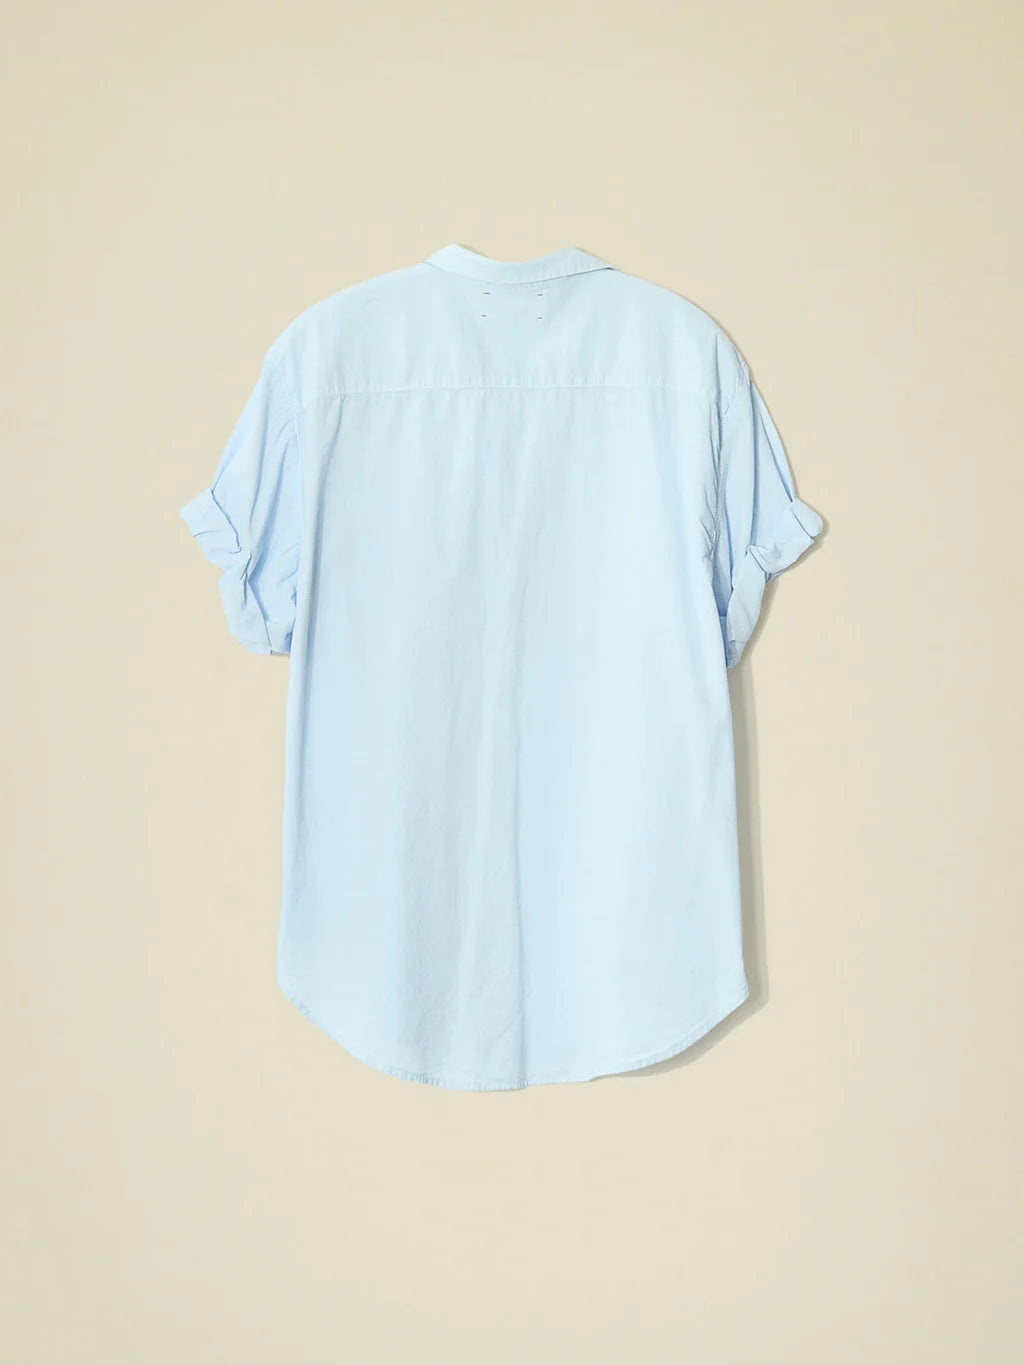 Channing Shirt in Baby Blue